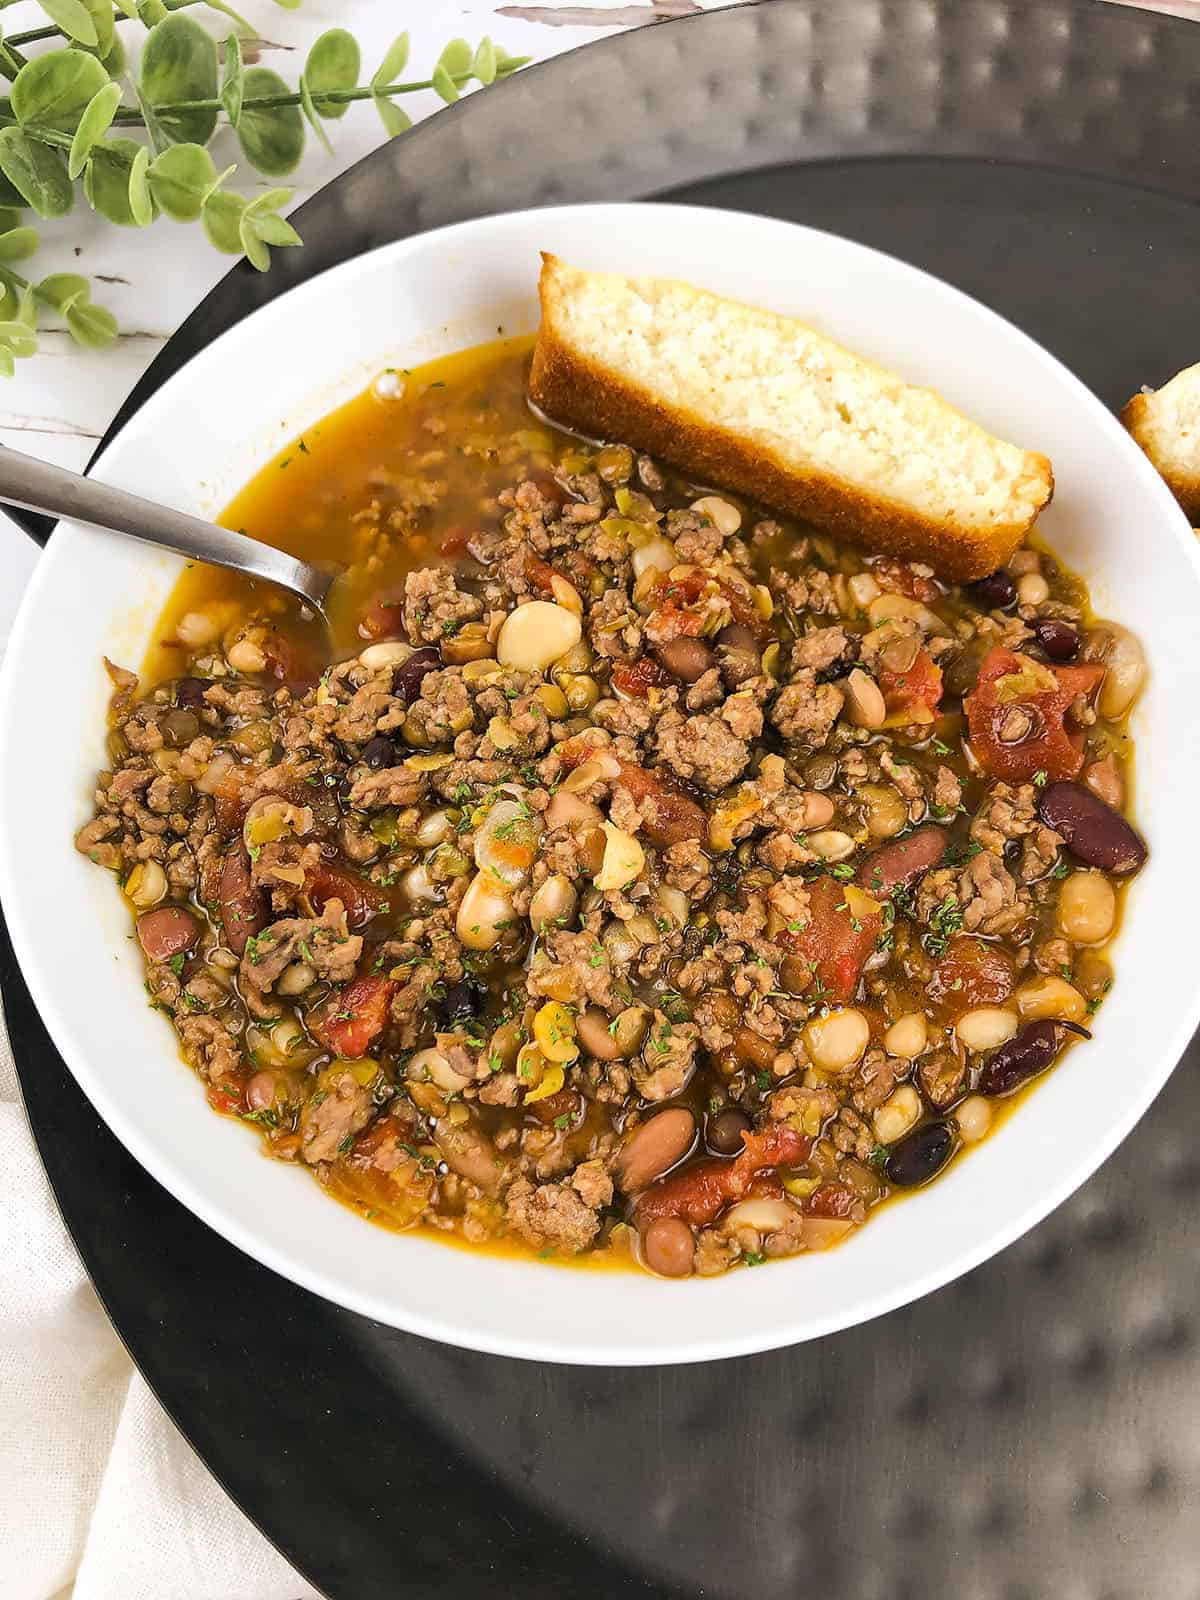 The 15 bean soup with a piece of cornbread at the top. A spoon is sticking out on the left side.